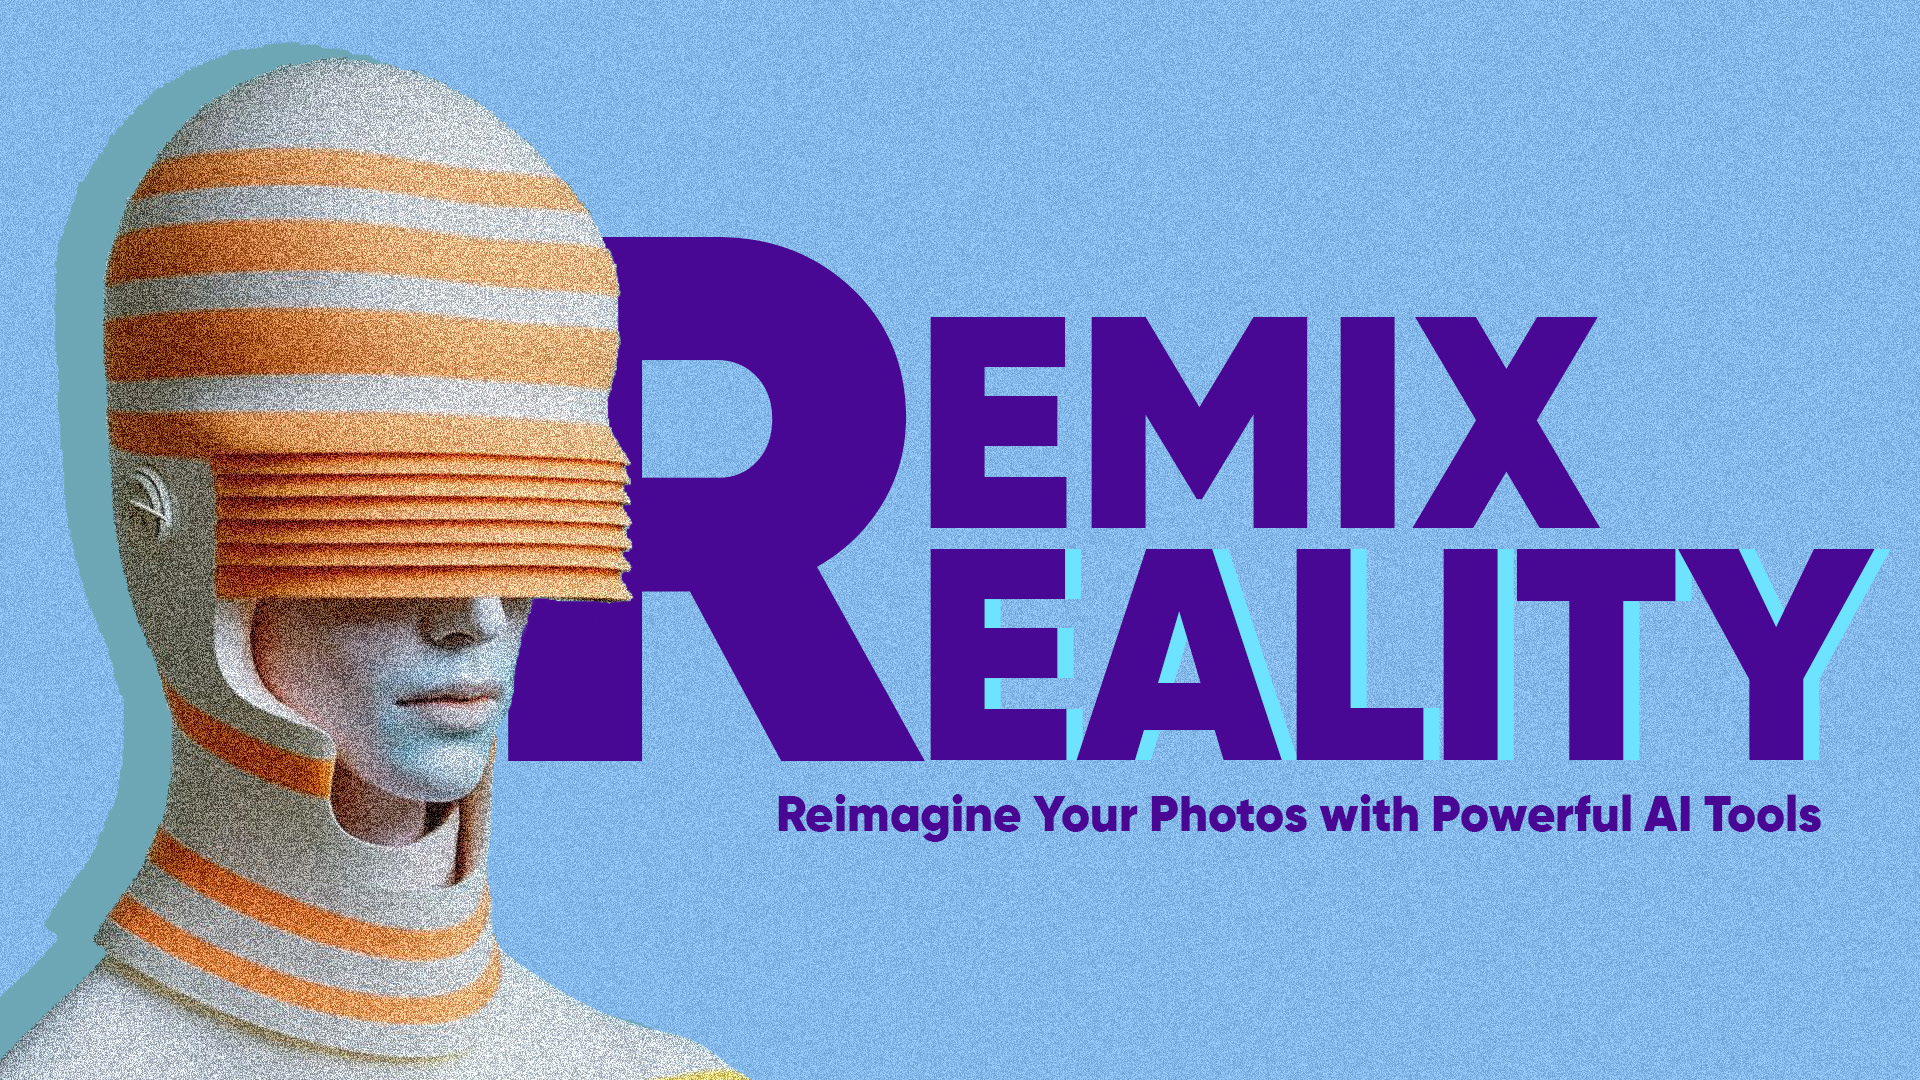 Remix Reality: Reimagine Your Photos with Powerful AI Tools